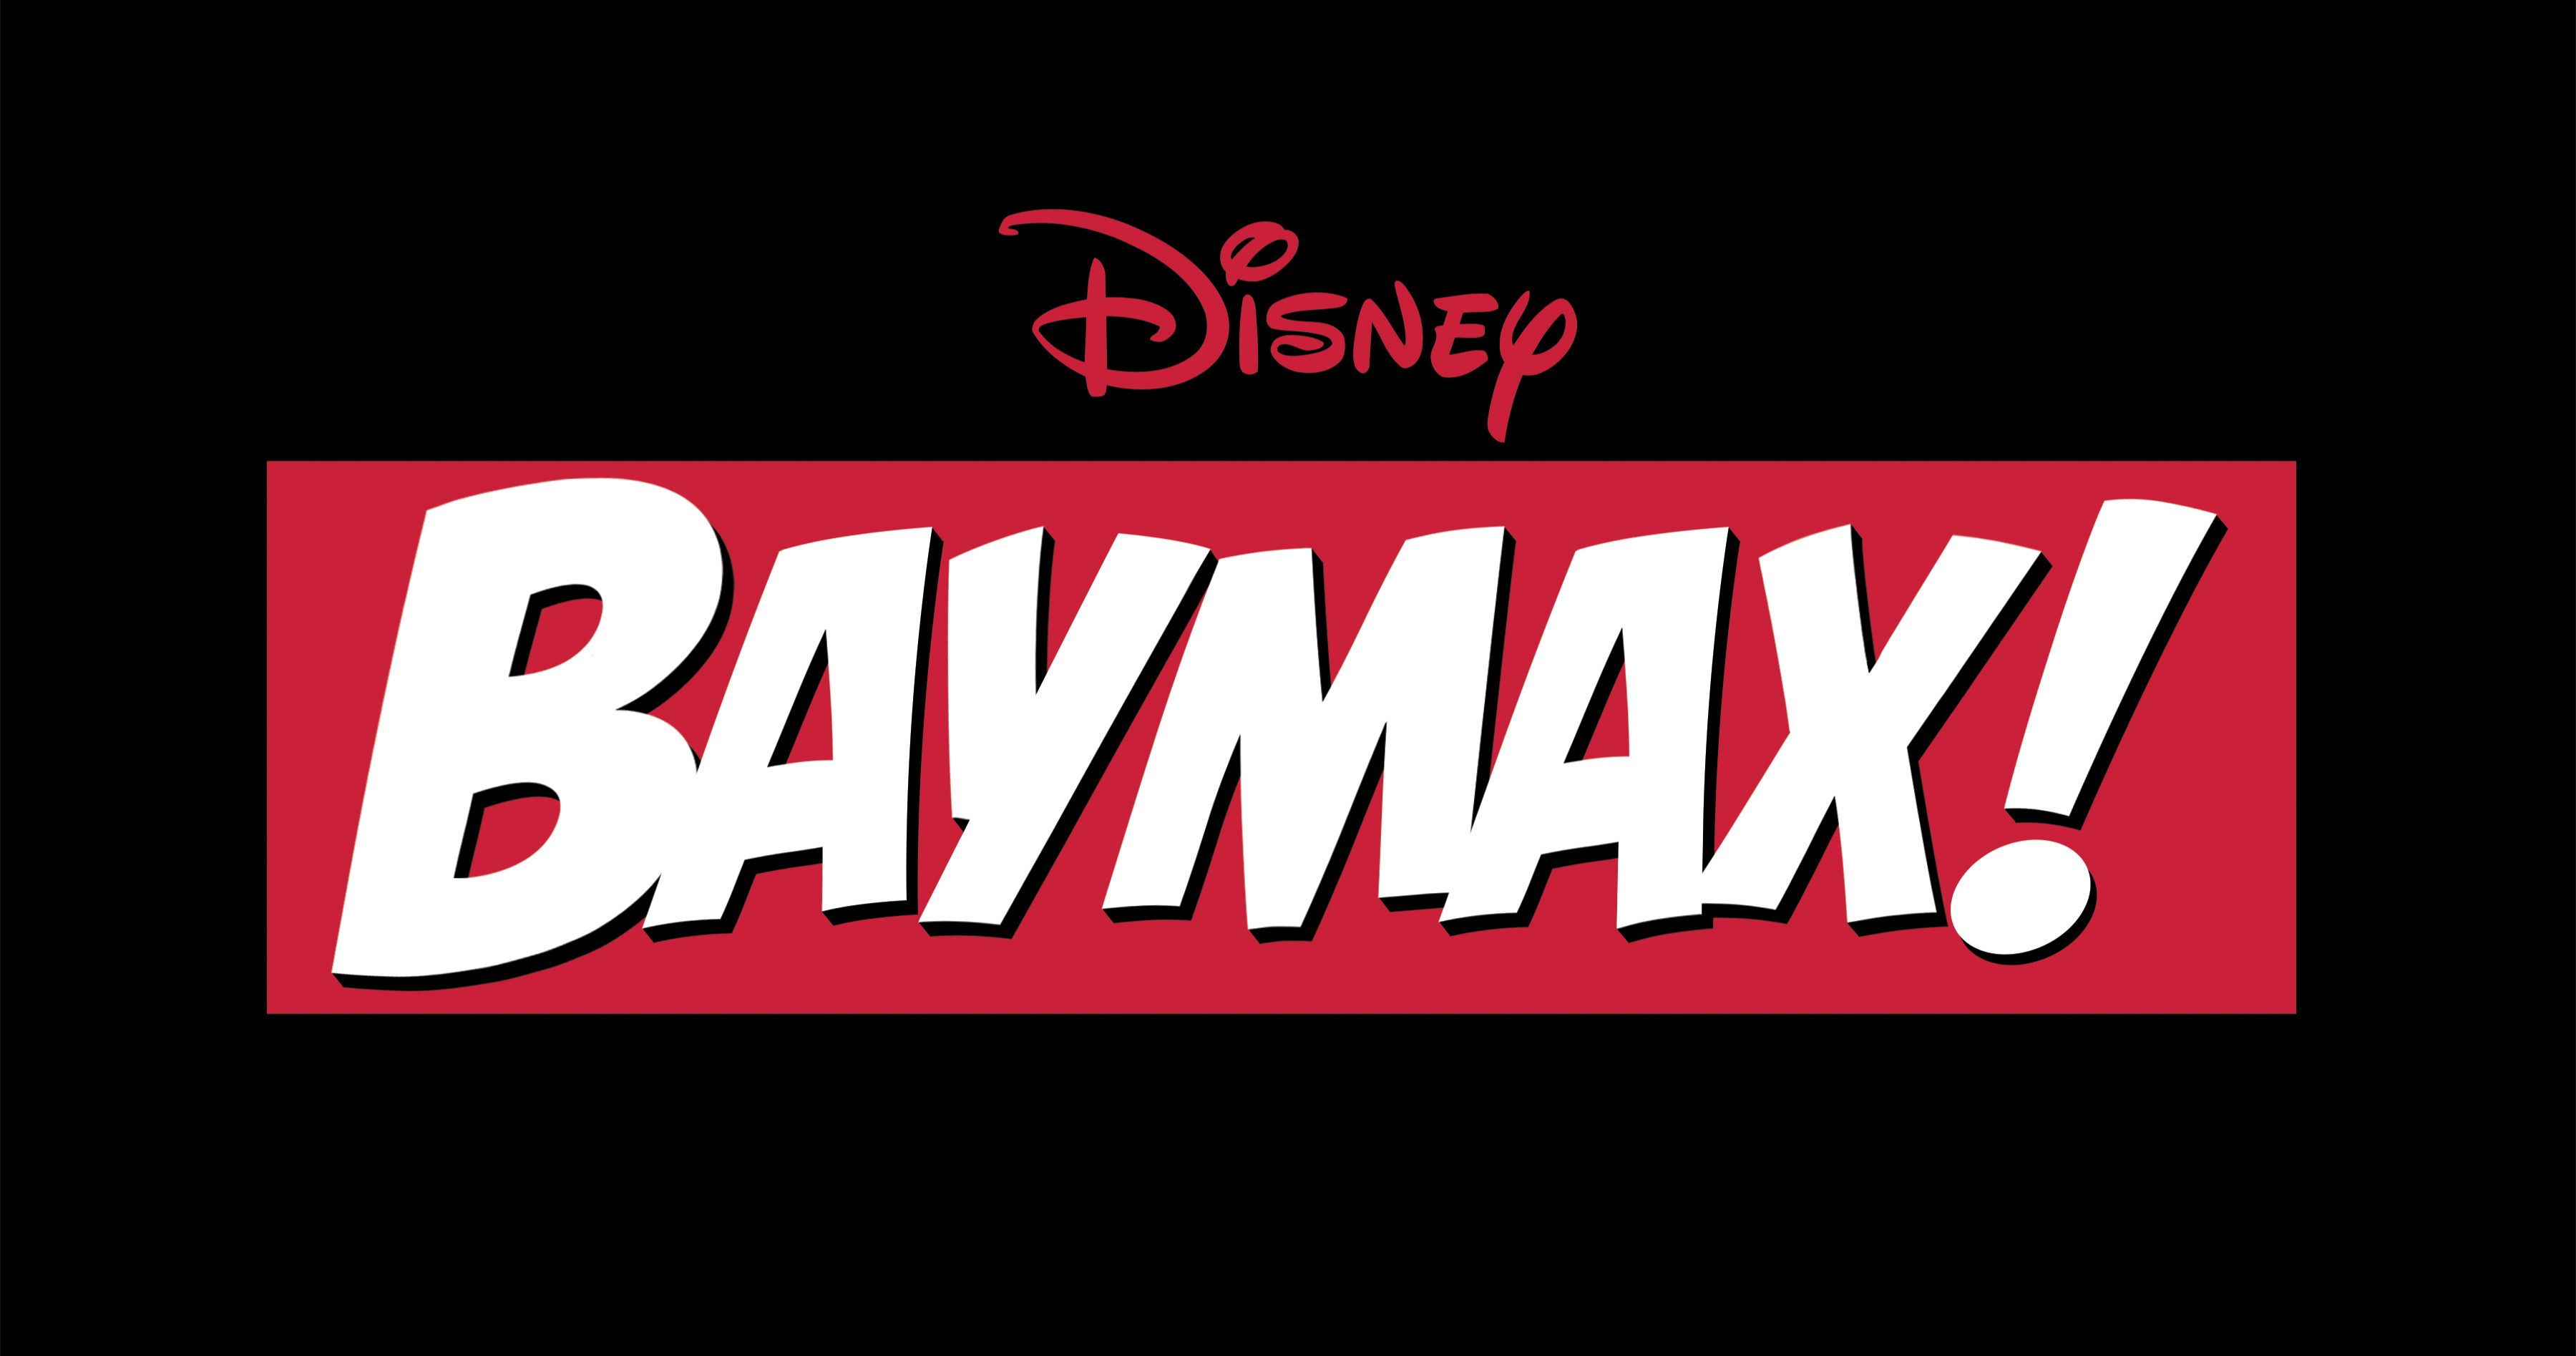 Big Hero 6 Favorite Baymax Gets a New Disney+ Animated Spinoff Series